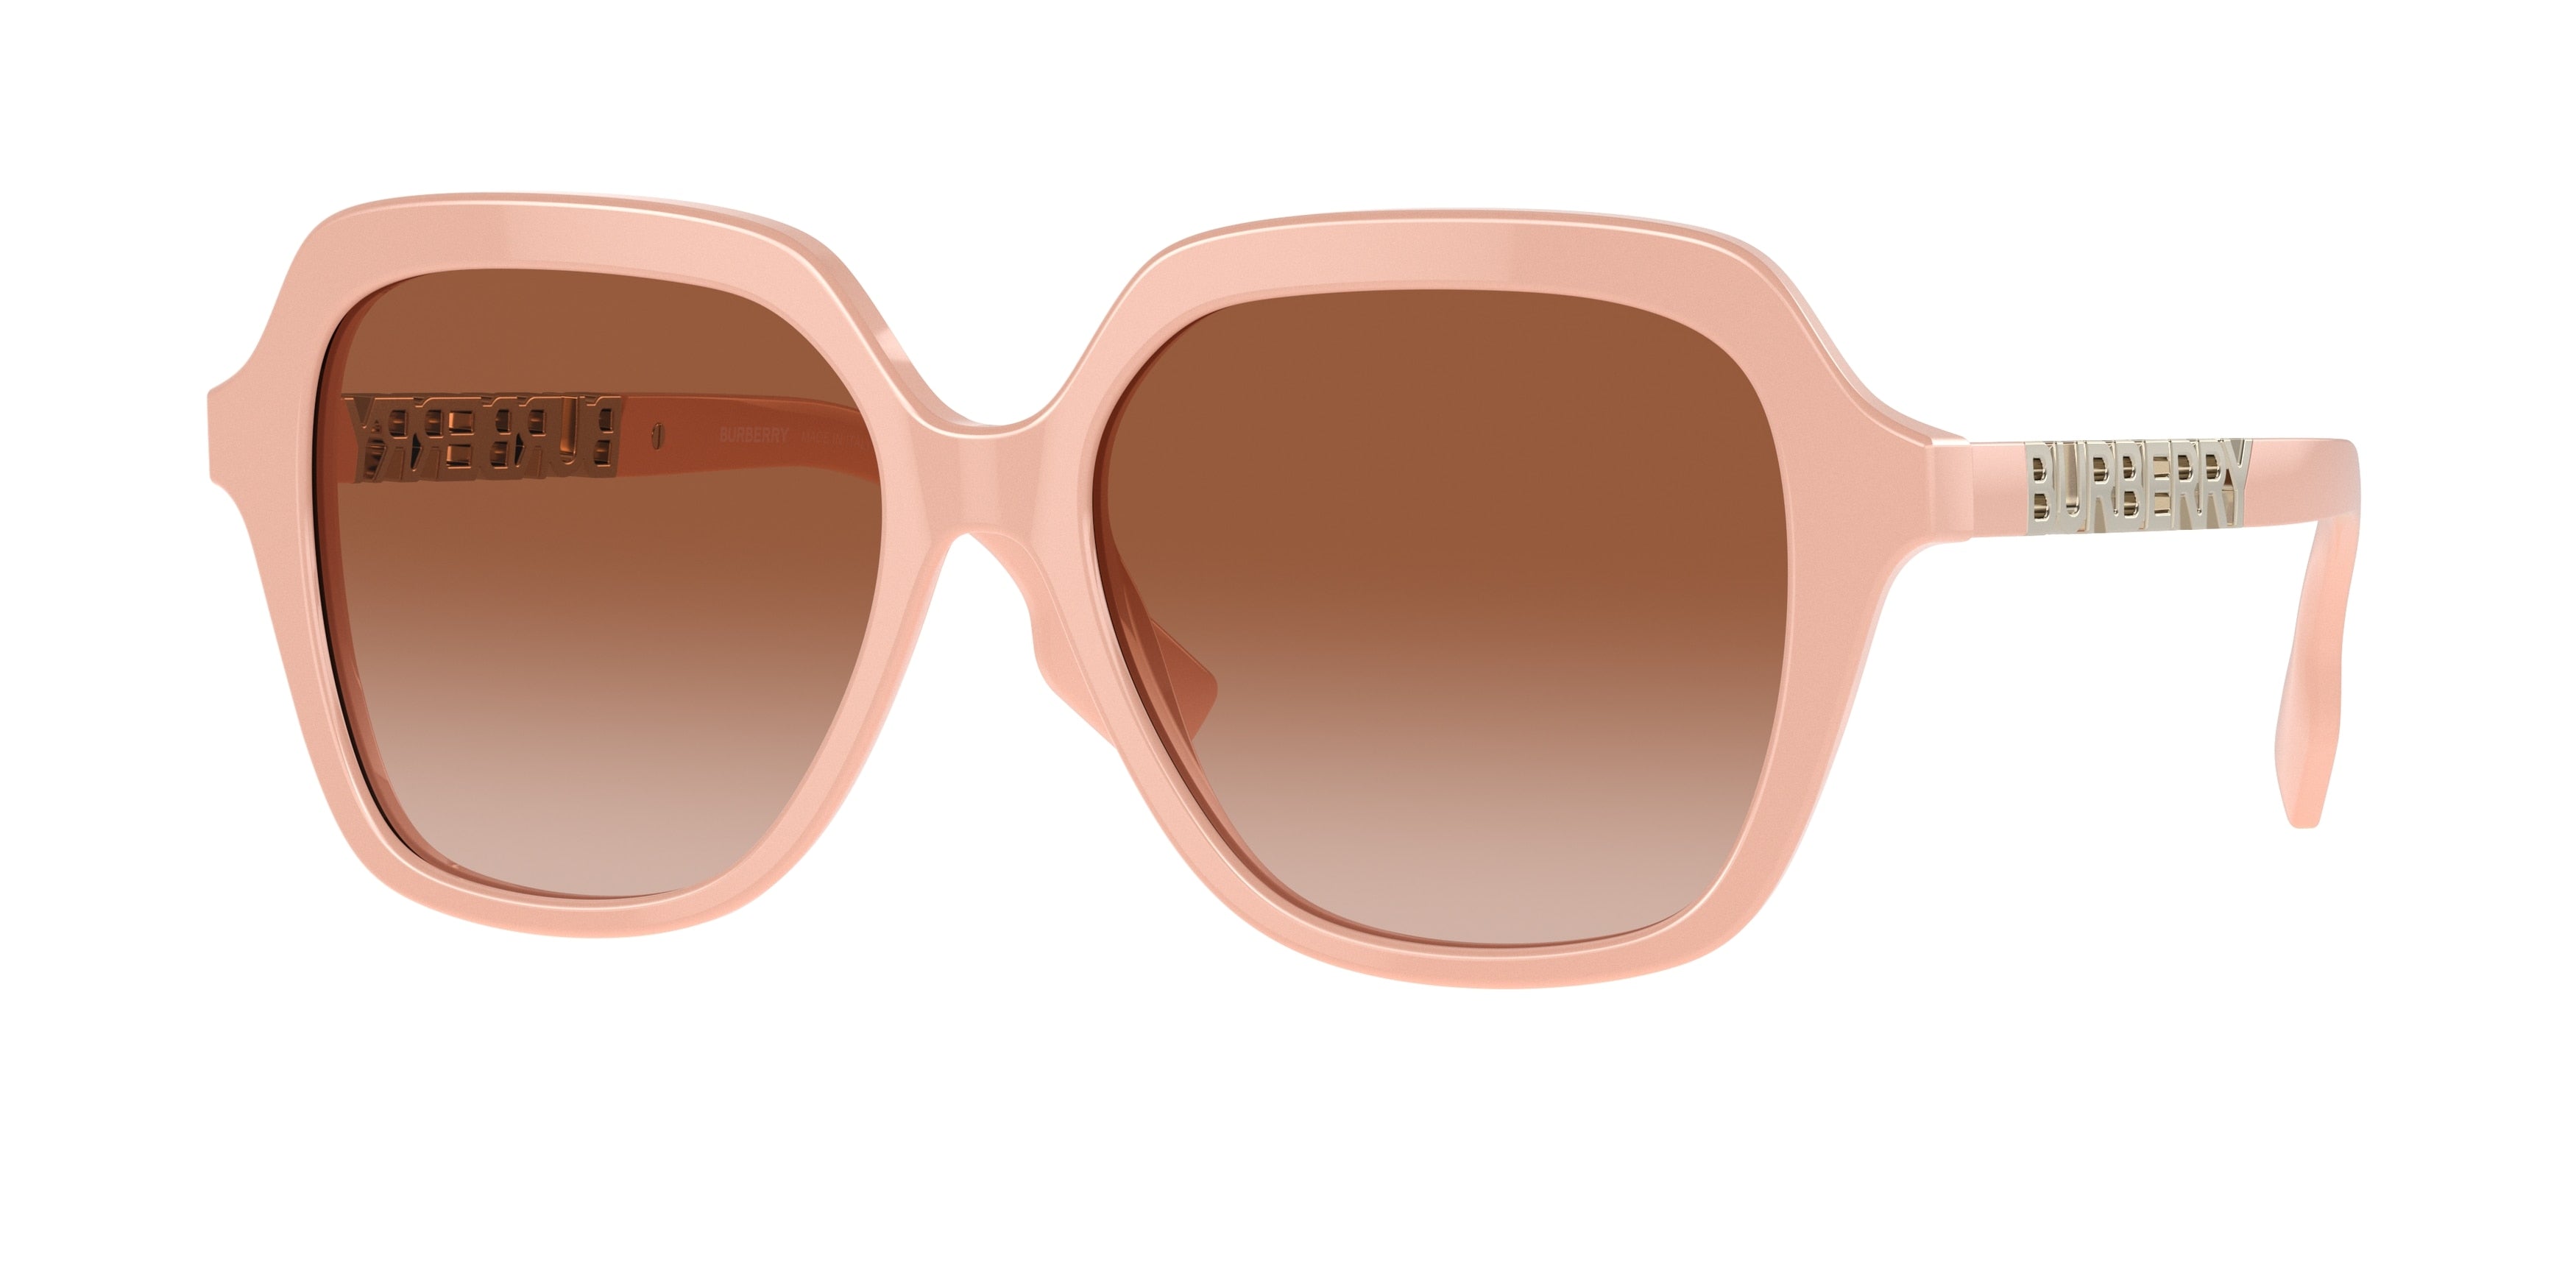 Burberry JONI BE4389 Square Sunglasses  406113-Pink 55-140-16 - Color Map Pink